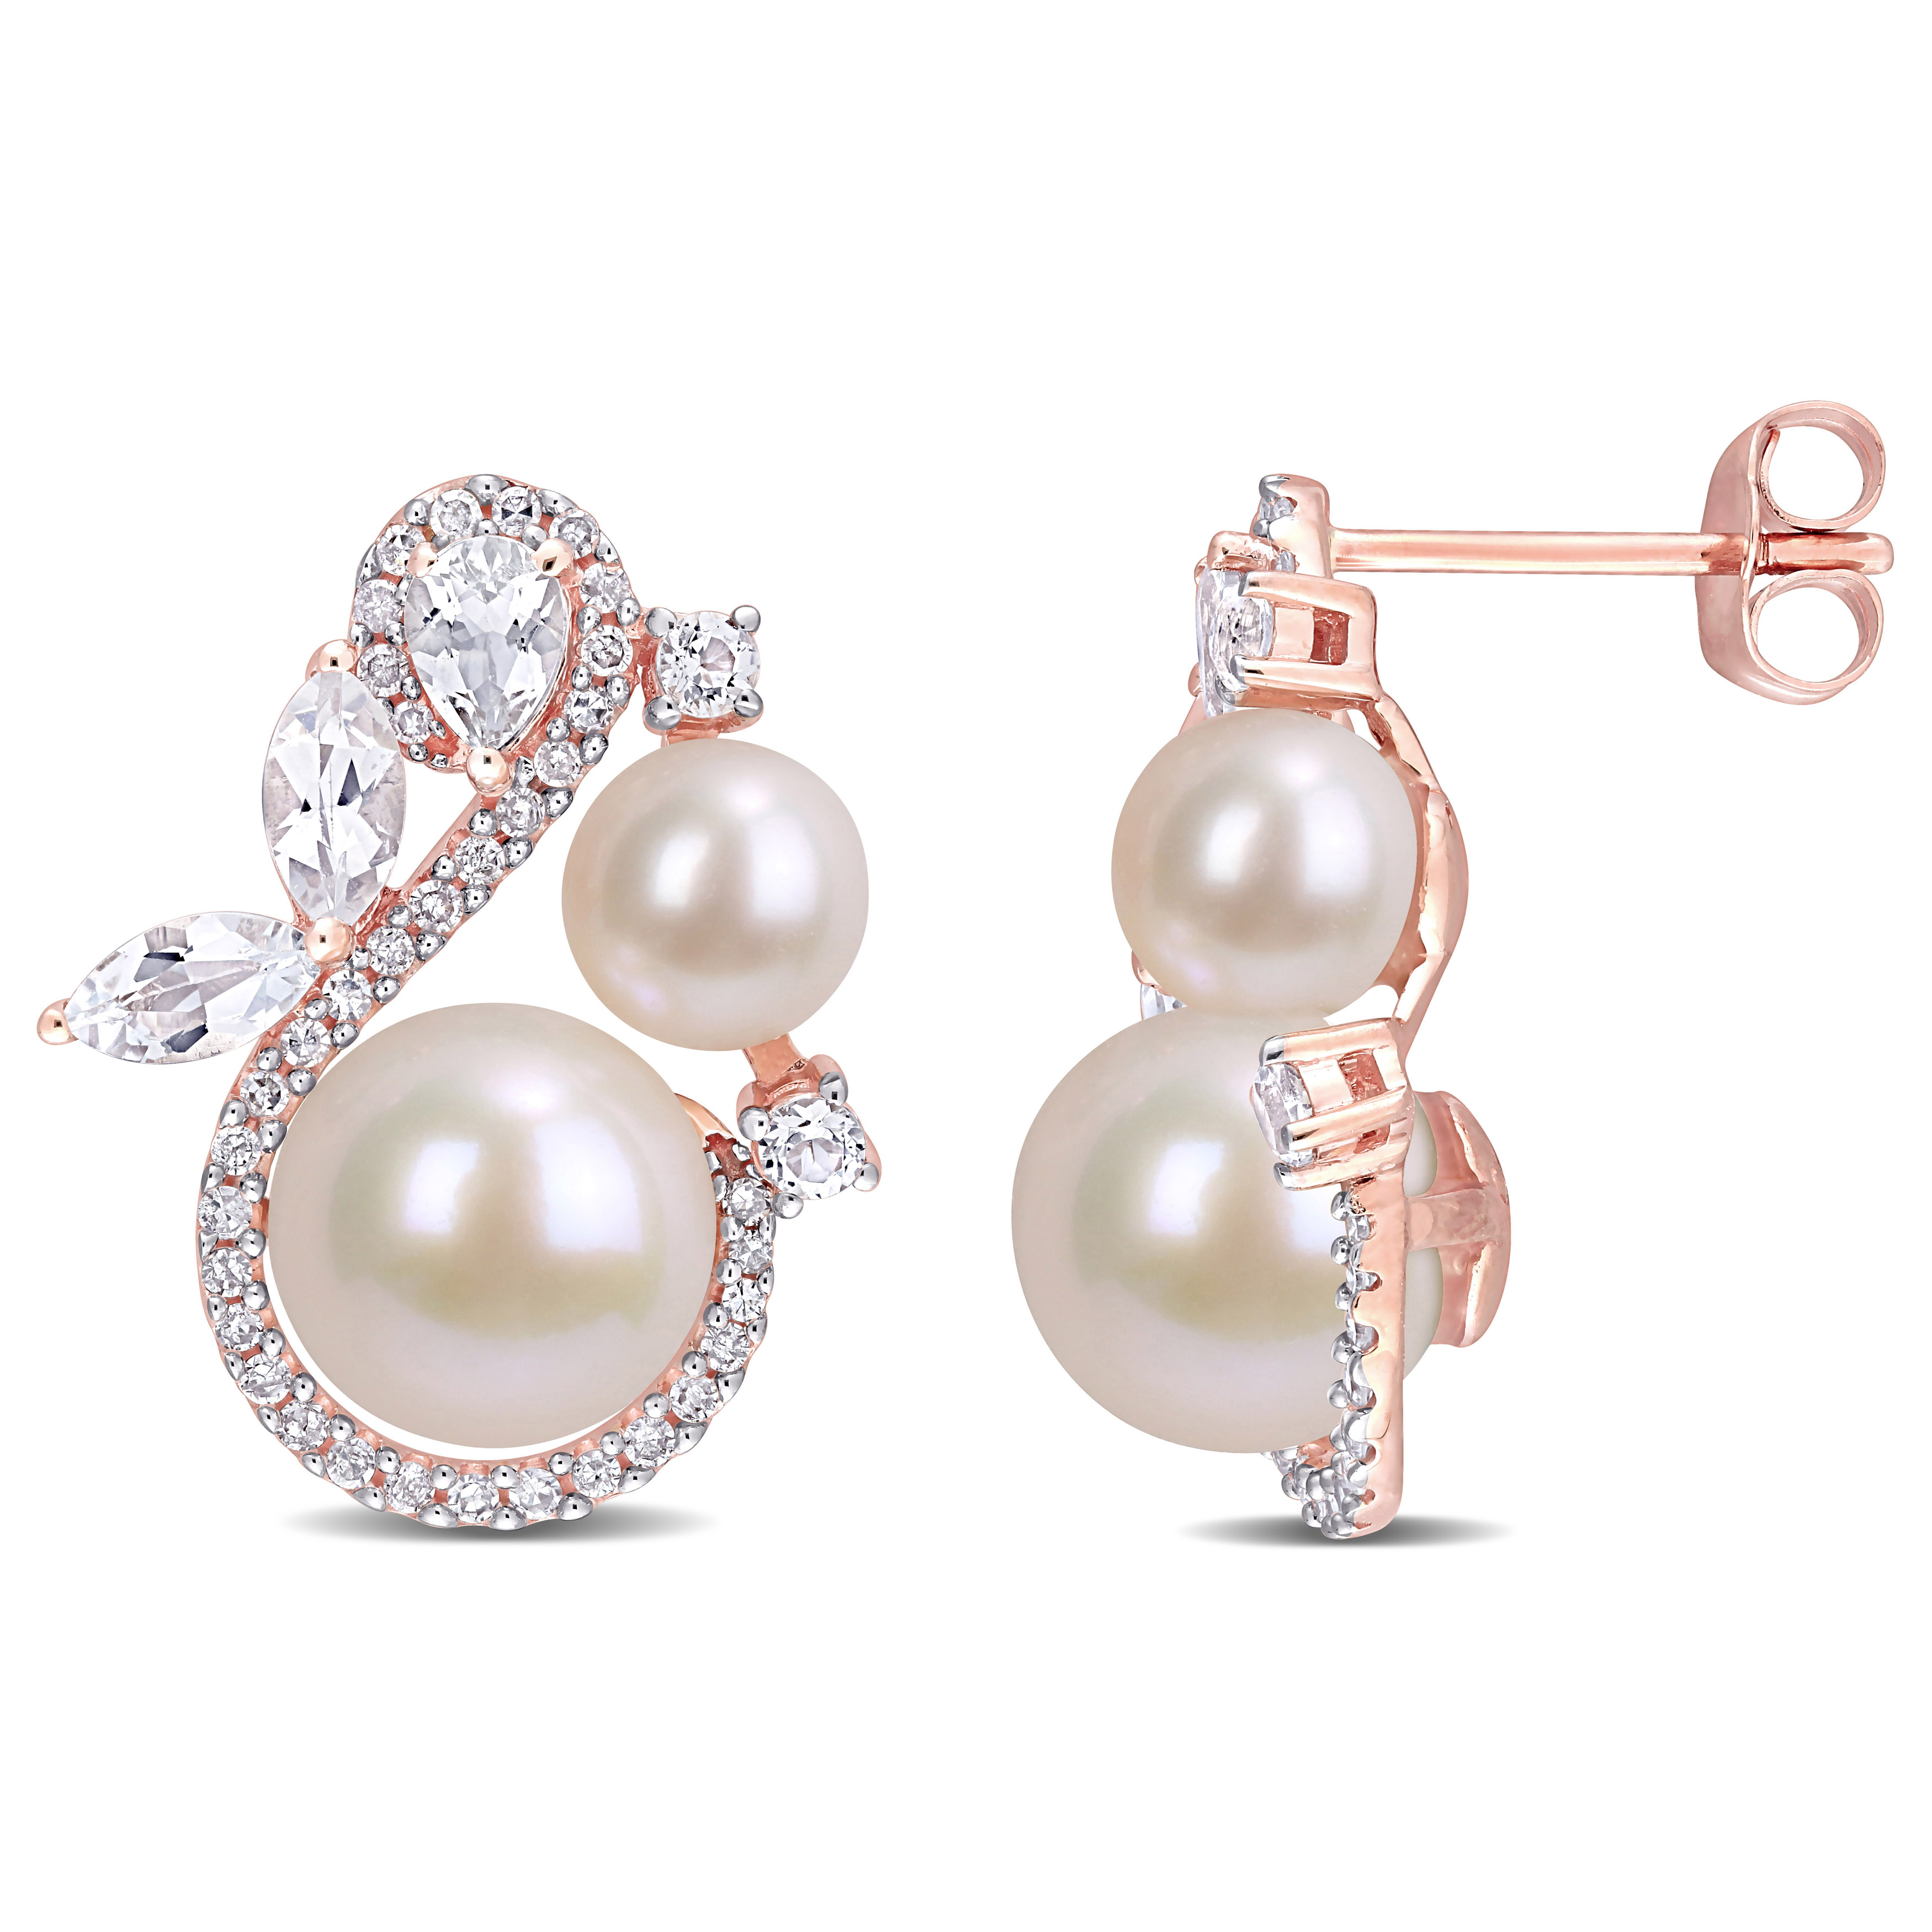 5.5-6 MM Cultured Freshwater White Pearl and 1 1/8 CT TGW White Topaz with 1/3 CT TW Diamond Earrings in 10k Rose Gold